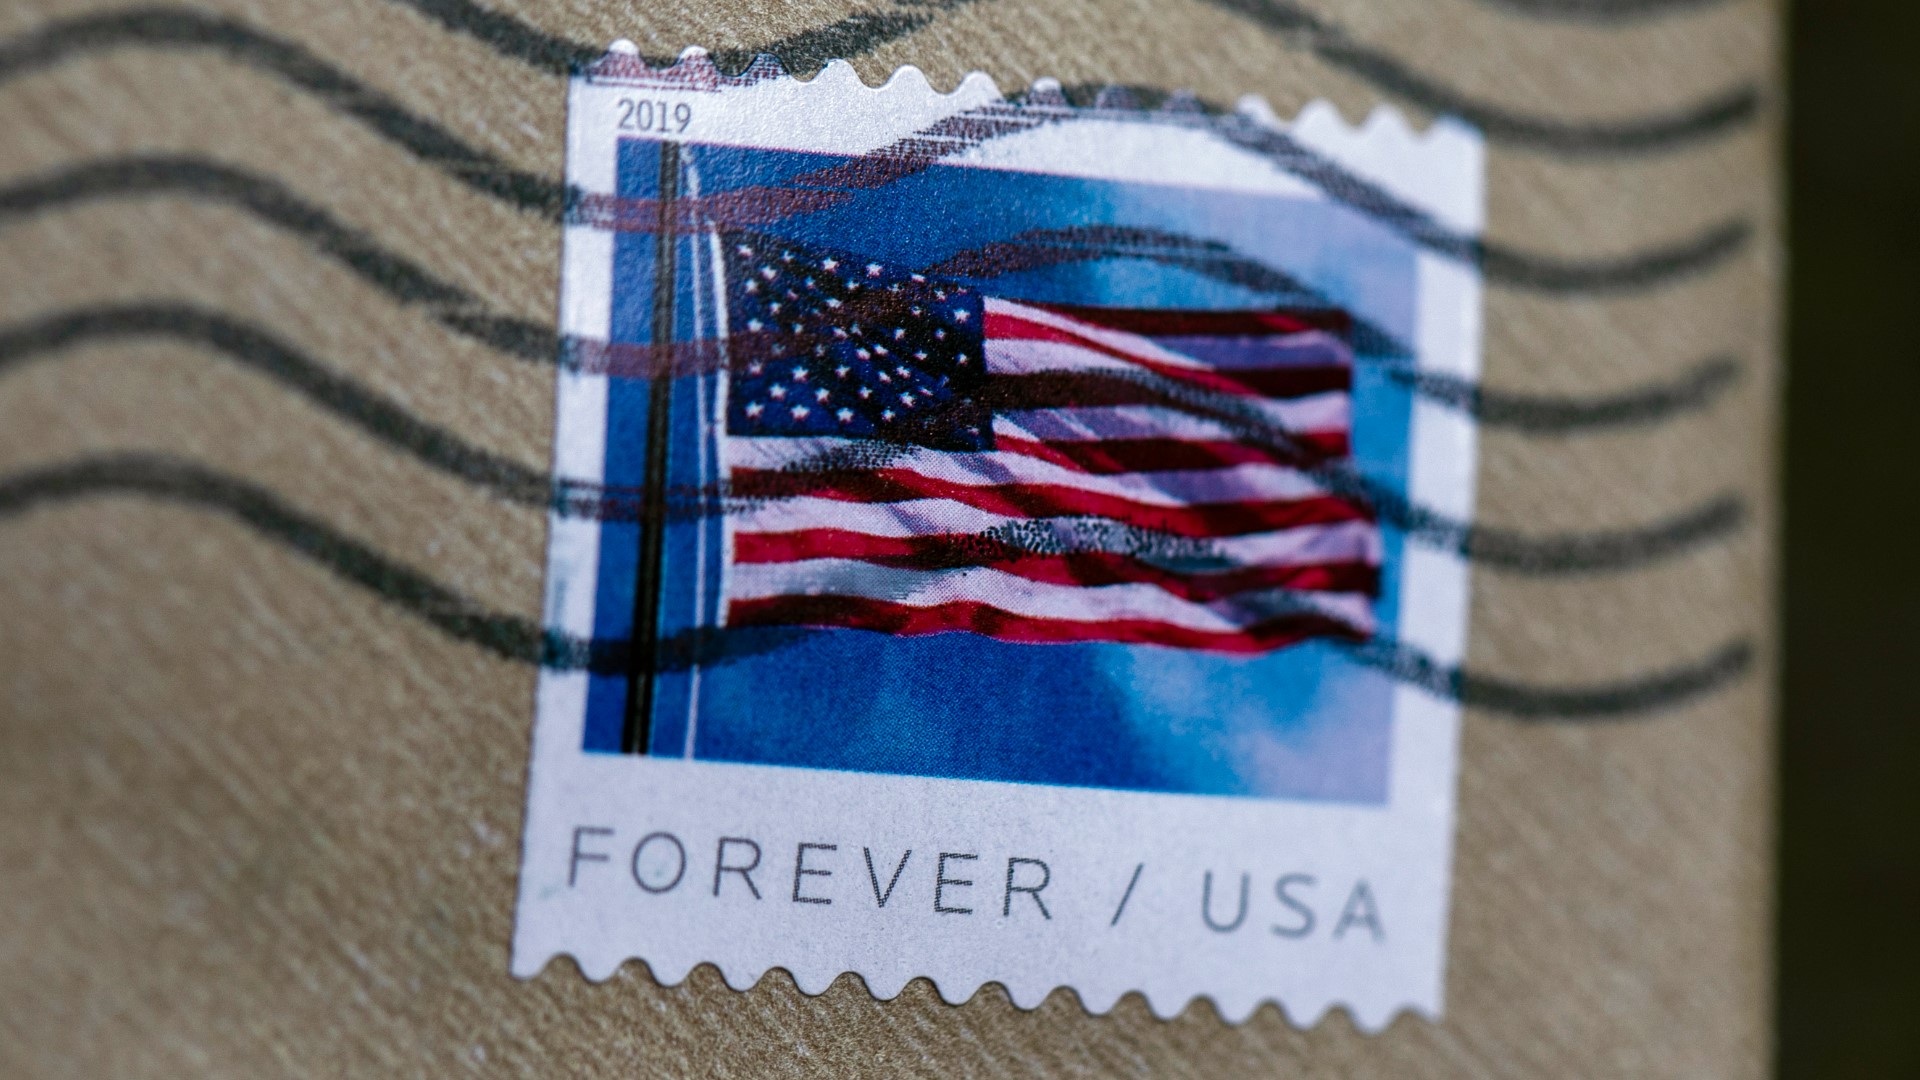 Lot of 50 Global Forever Stamps